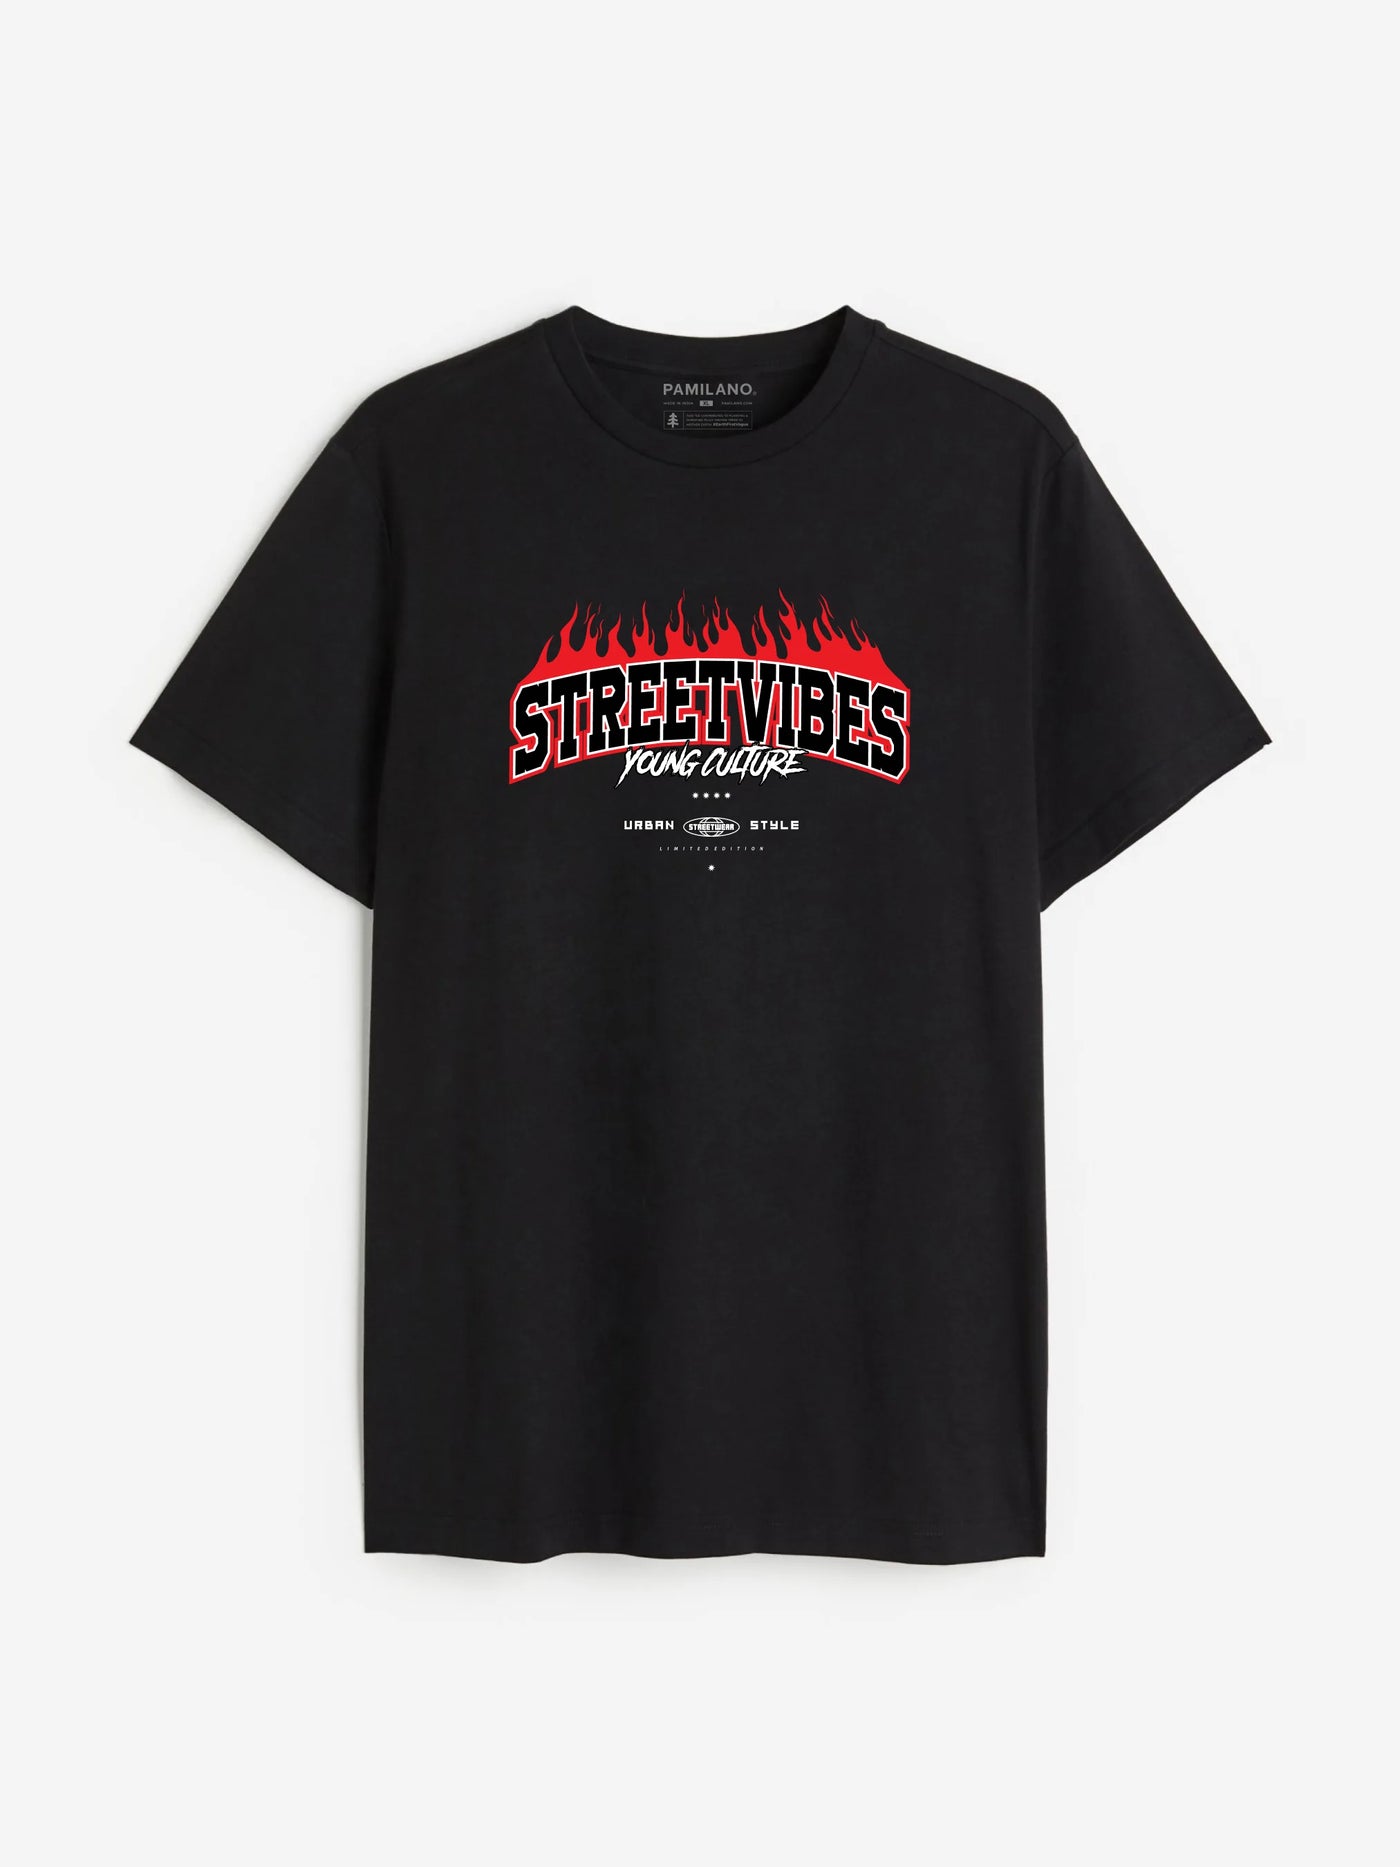 Street Vibes Slogan with Fire Flame Effect - Unisex T-Shirt